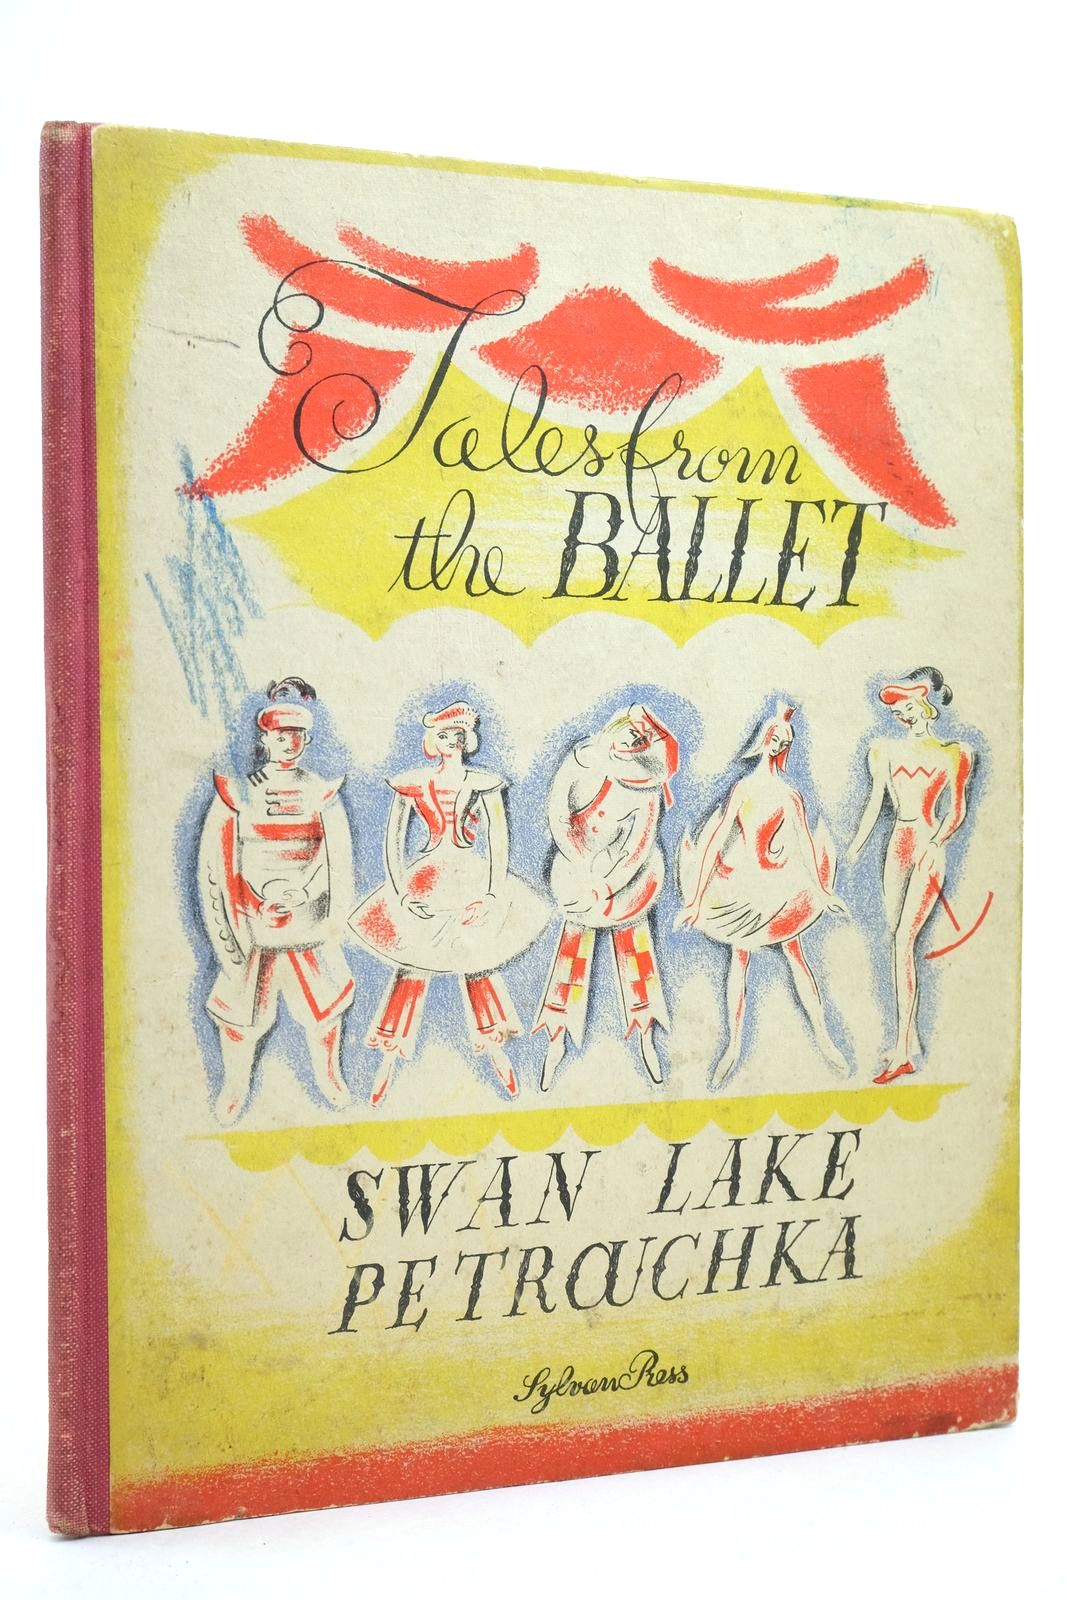 Photo of TALES FROM THE BALLET SWAN LAKE PETROUCHKA written by Lynham, Deryck illustrated by Green, Sylvia published by Sylvan Press (STOCK CODE: 2139965)  for sale by Stella & Rose's Books